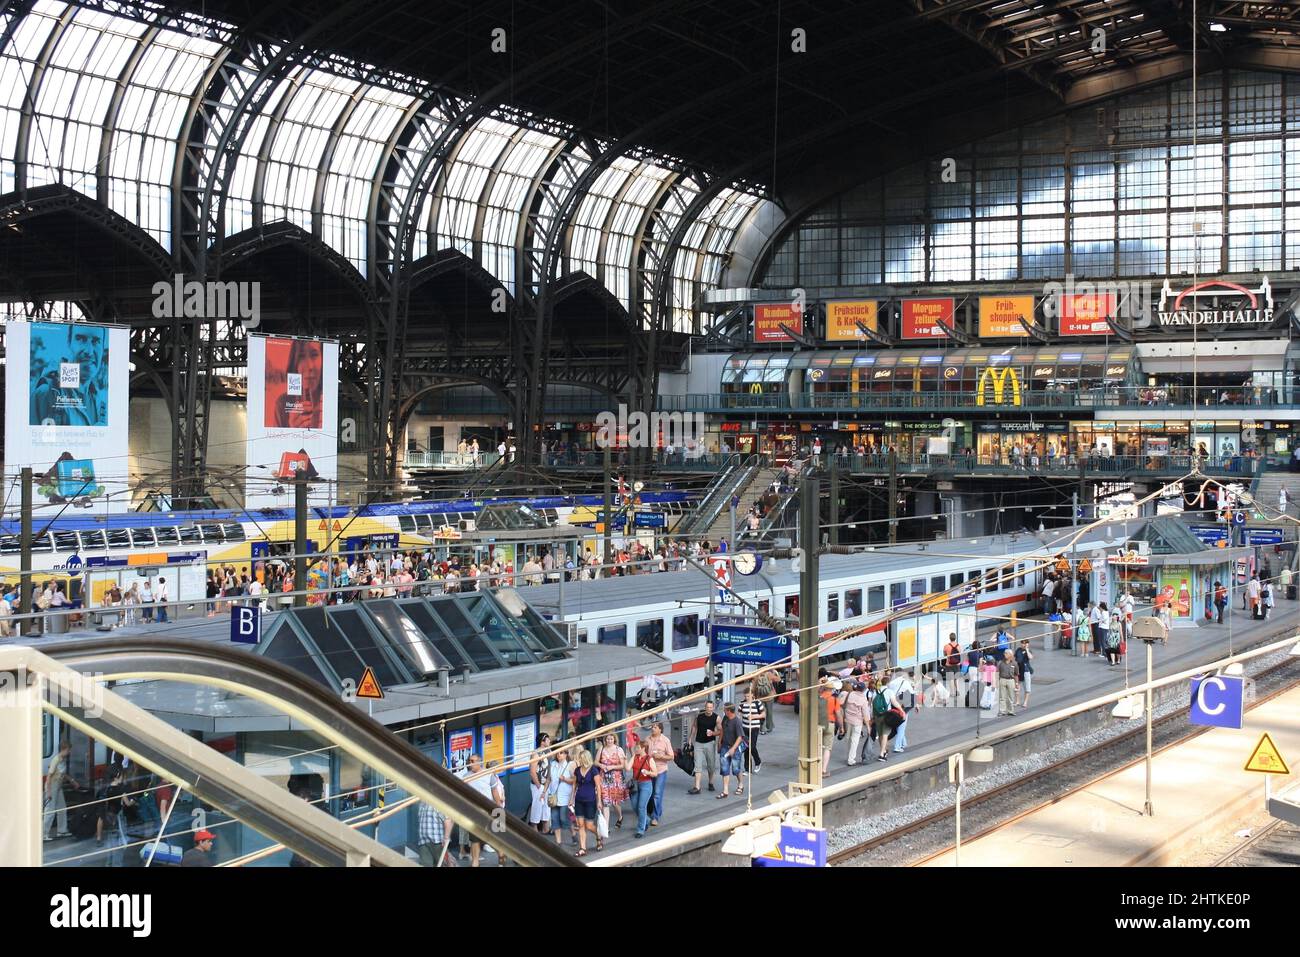 Interior of Wandelhalle, a large hall of Hamburg main railway or central train station in summer. Crowd of people waiting on platform for departure. Stock Photo